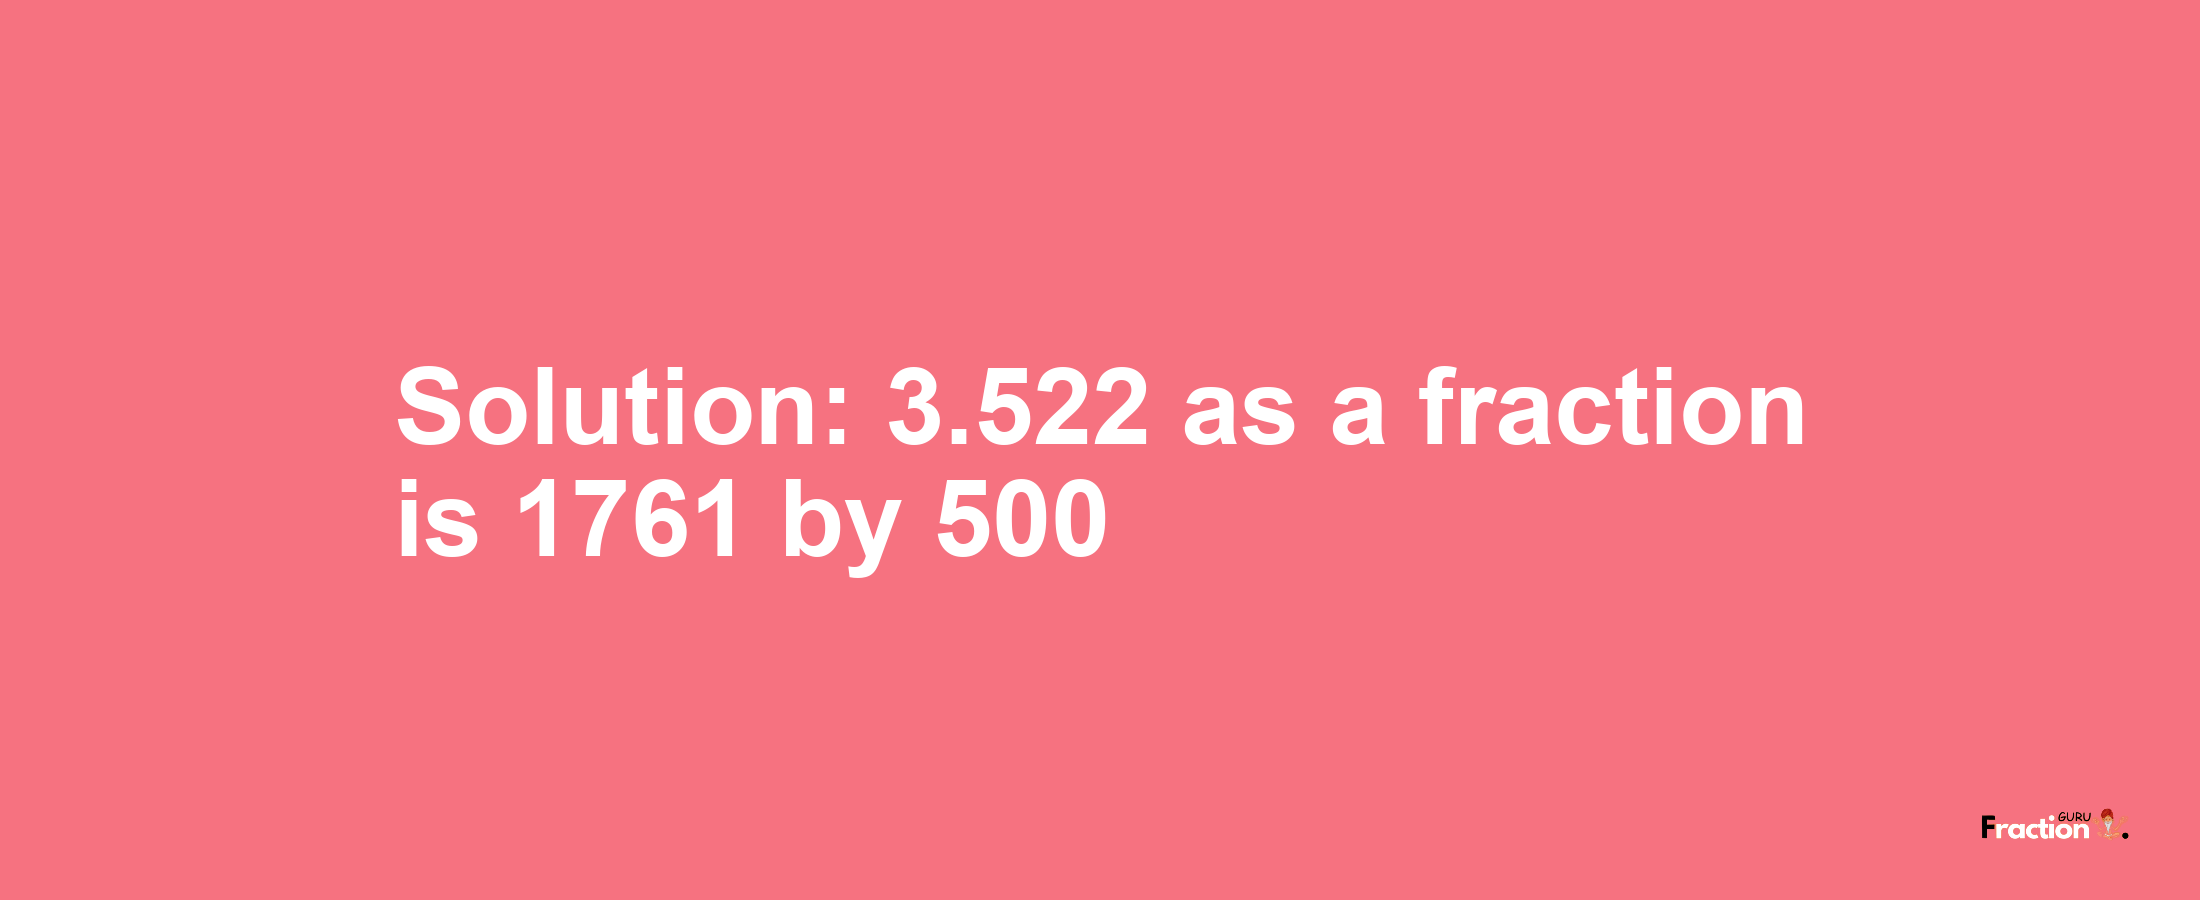 Solution:3.522 as a fraction is 1761/500